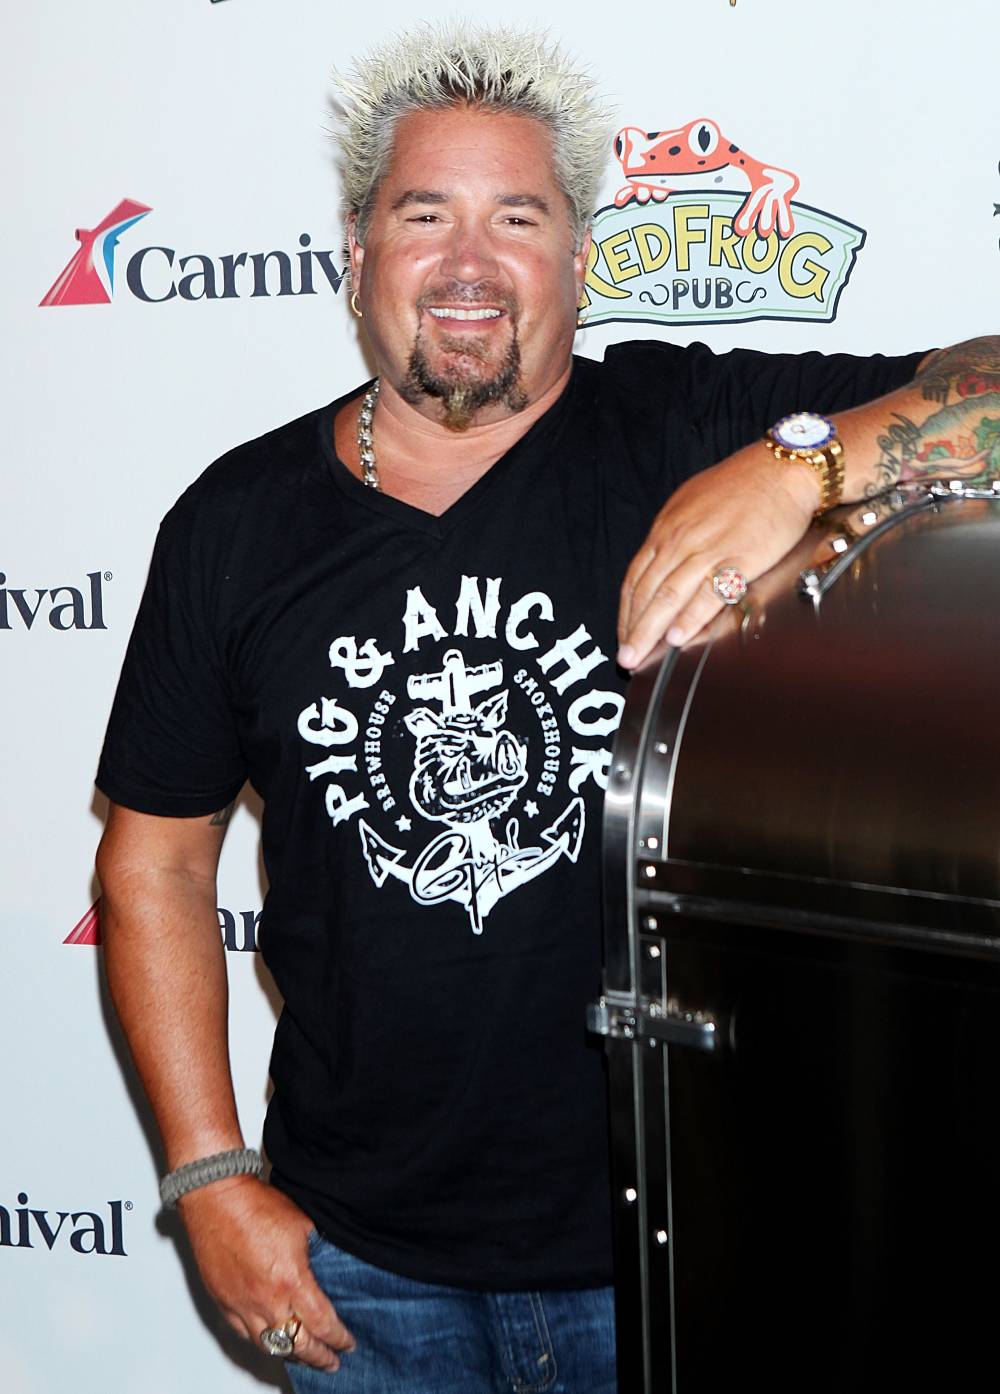 Guy Fieri Flavorful Jalapeno Pig Poppers Are Great Quarantine Snack